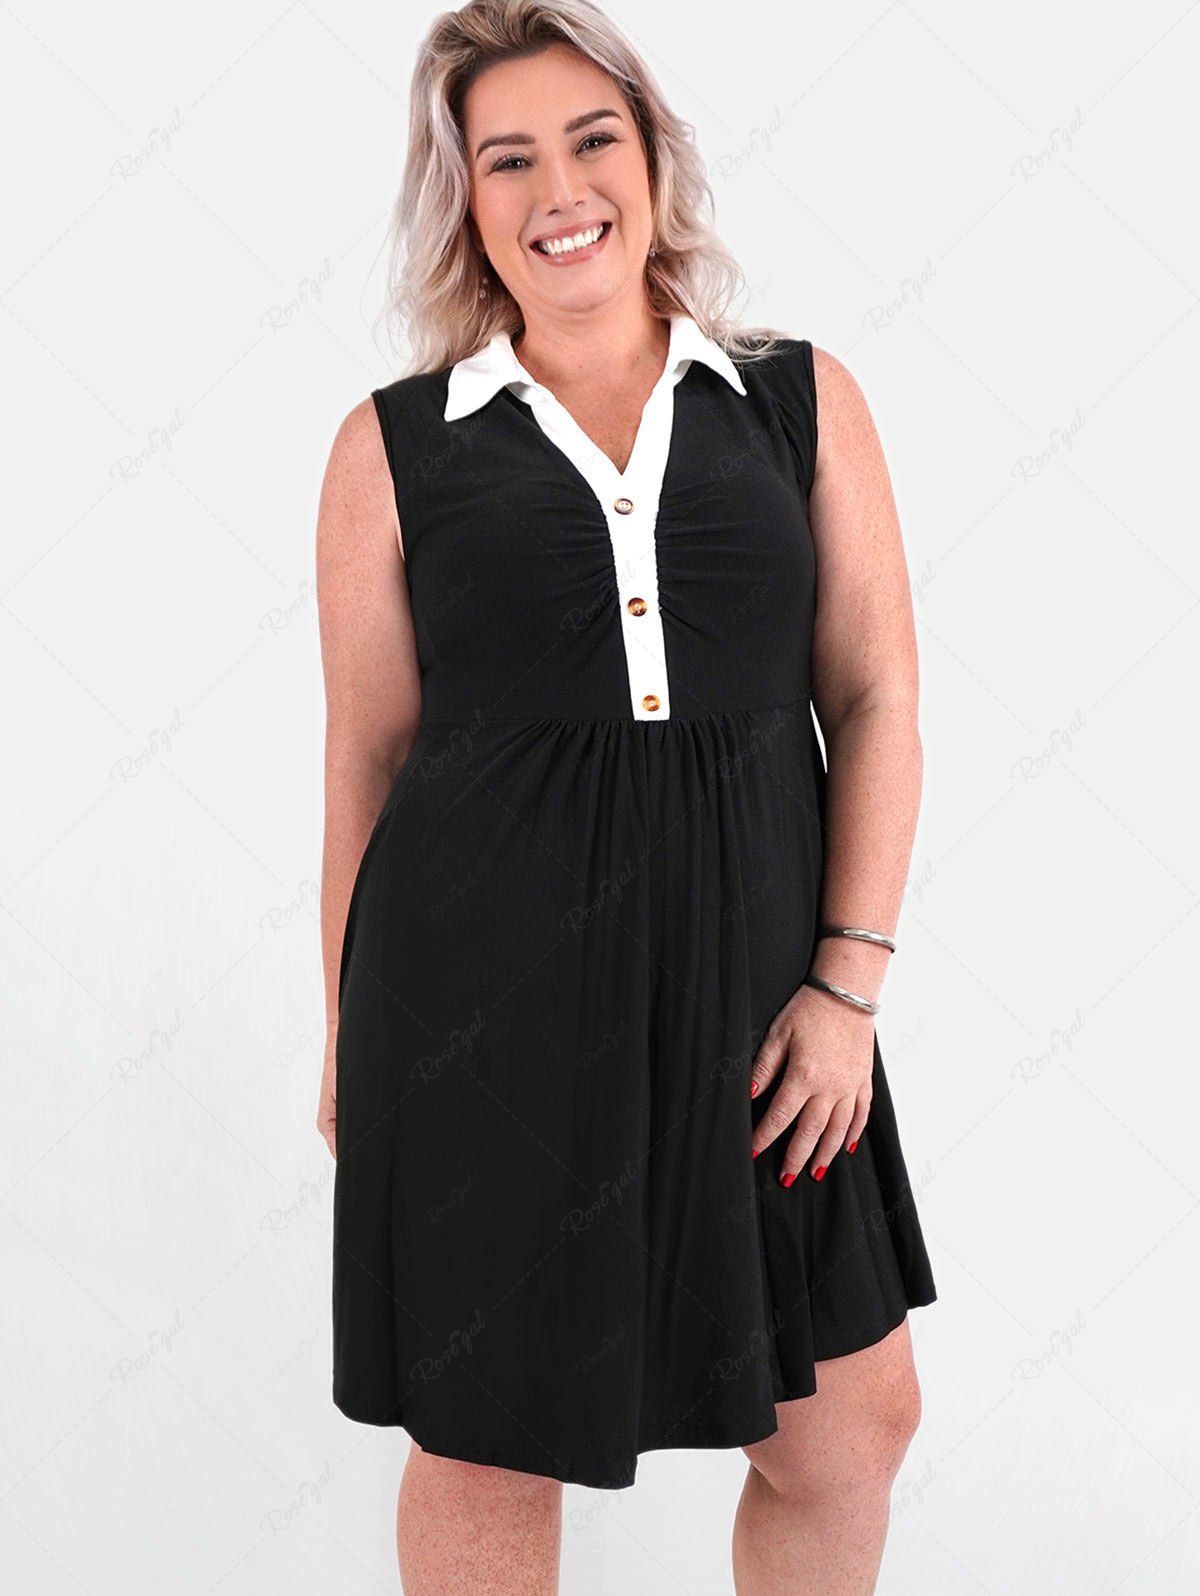 Rosegal Plus Size Sleeveless Colorblock Belted Knee Length Dress